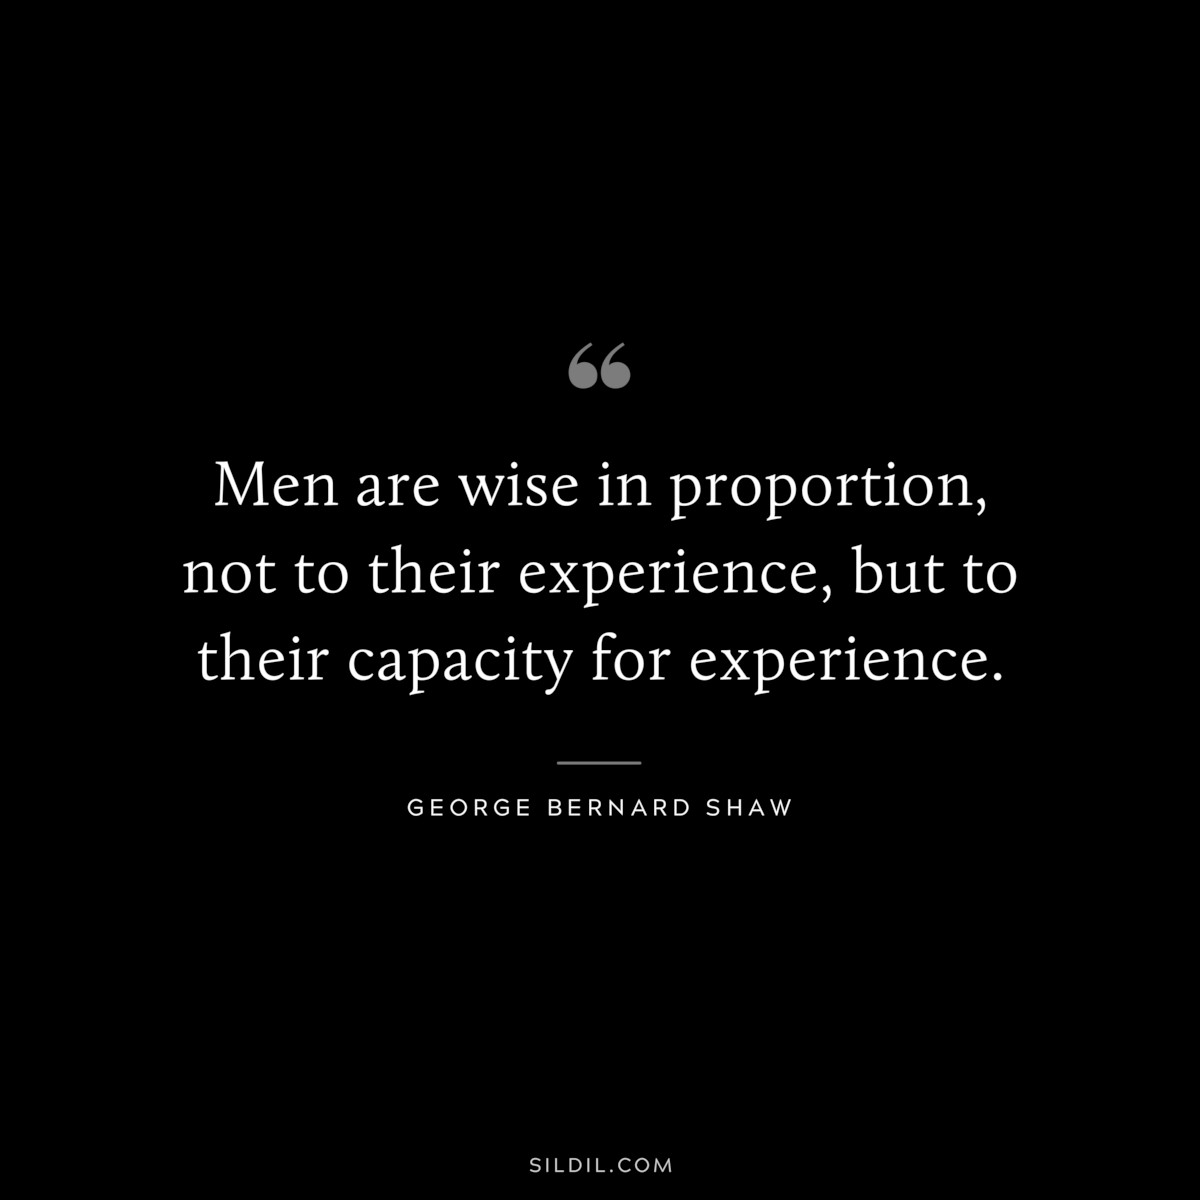 Men are wise in proportion, not to their experience, but to their capacity for experience. ― George Bernard Shaw